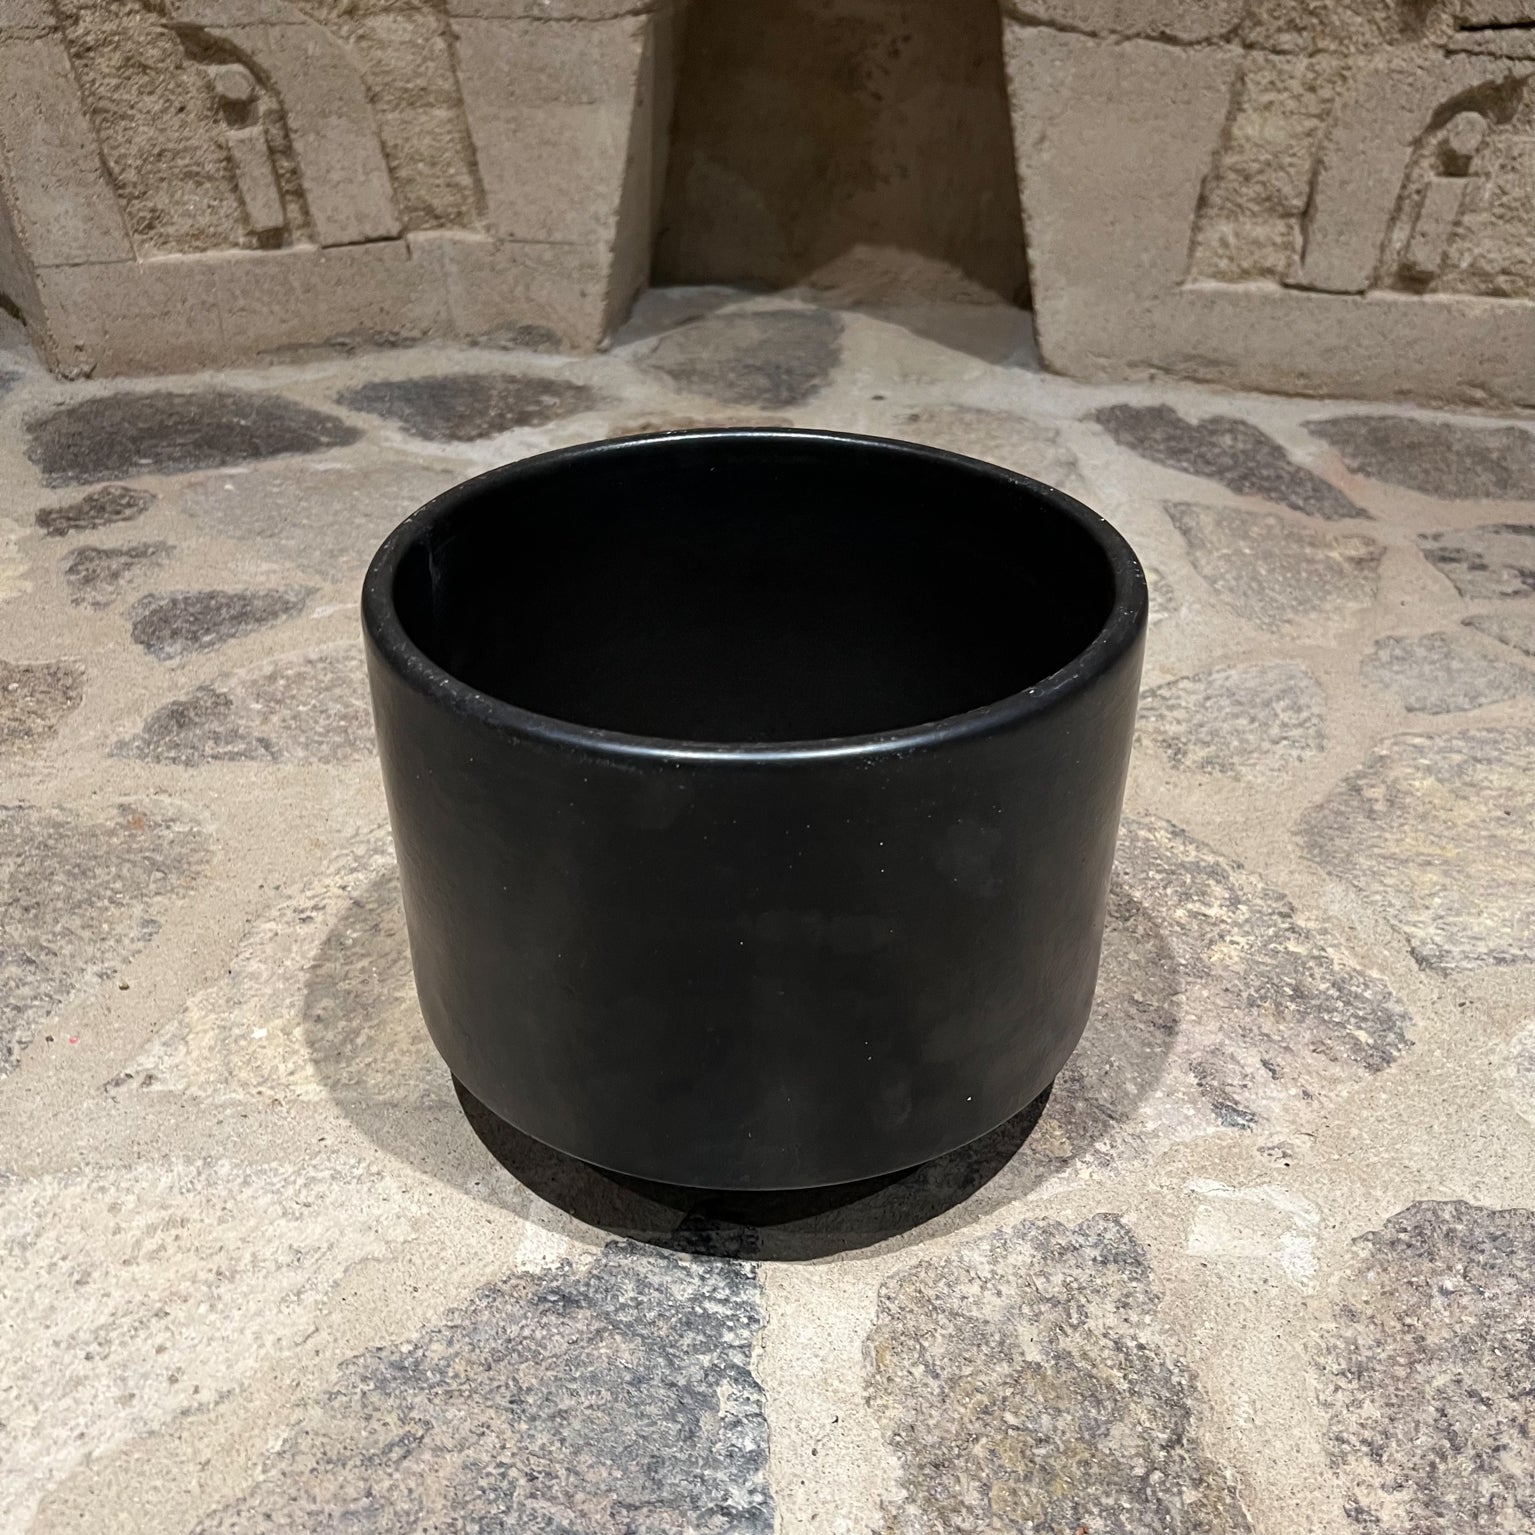 1960s California Modern matte black mid century architectural planter pot
Measures: 8 tall x 9.75
Black planter garden patio home
Style of Gainey Pottery. Signed underneath with maker's label. Hard to read.
Original preowned unrestored vintage